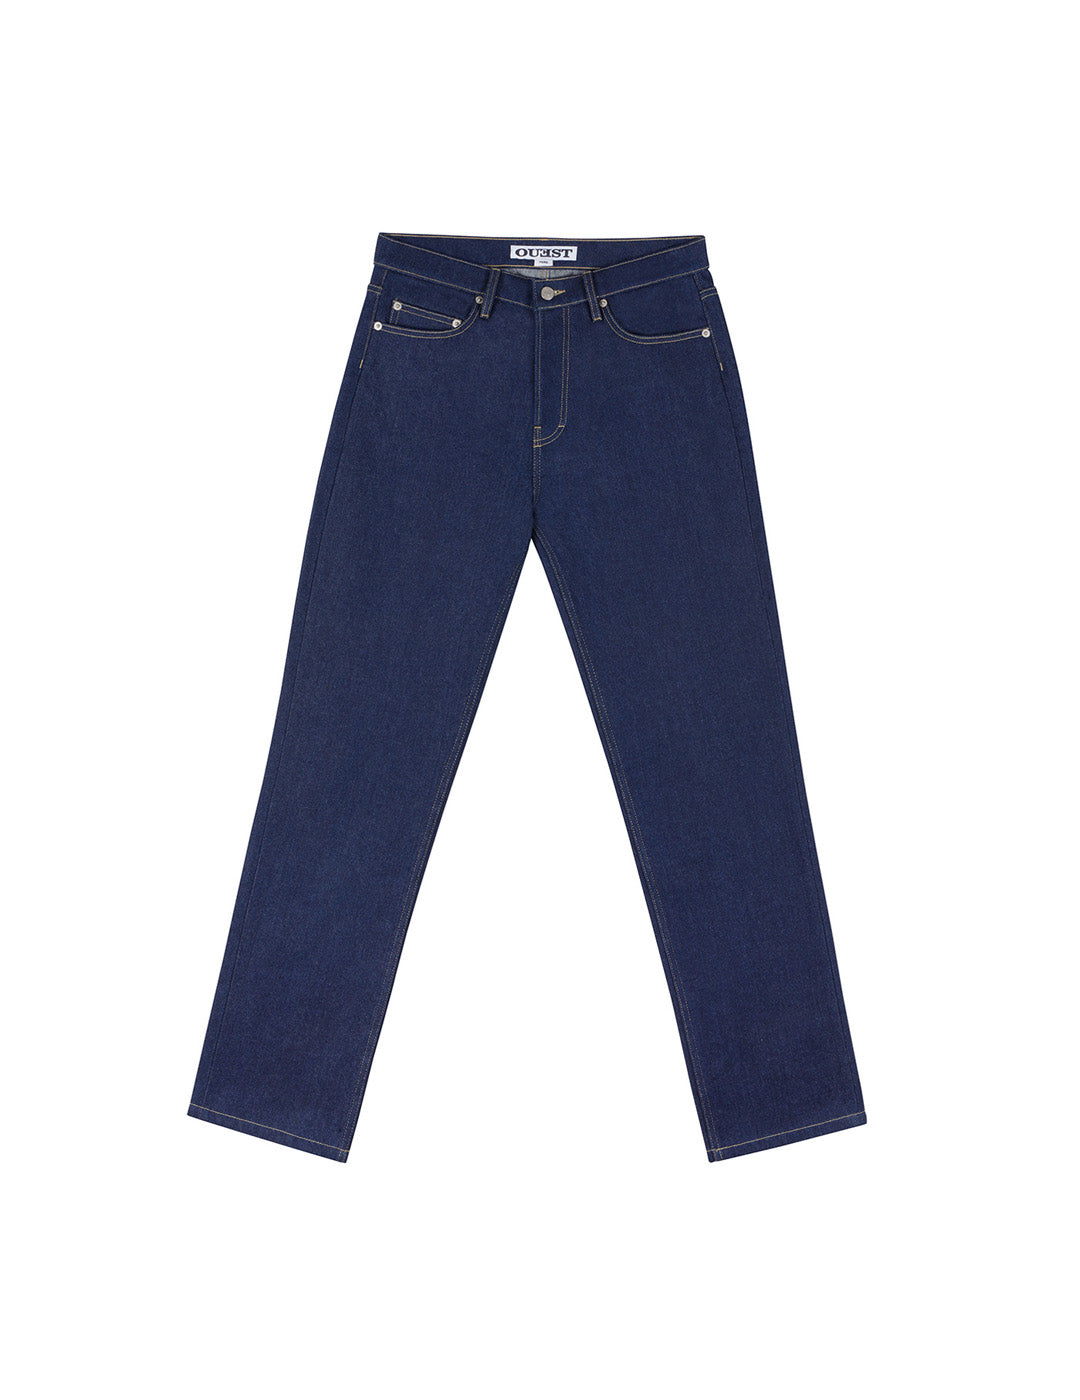 THE STRAIGHT LEG JEANS IN INDIGO RECYCLED DENIM